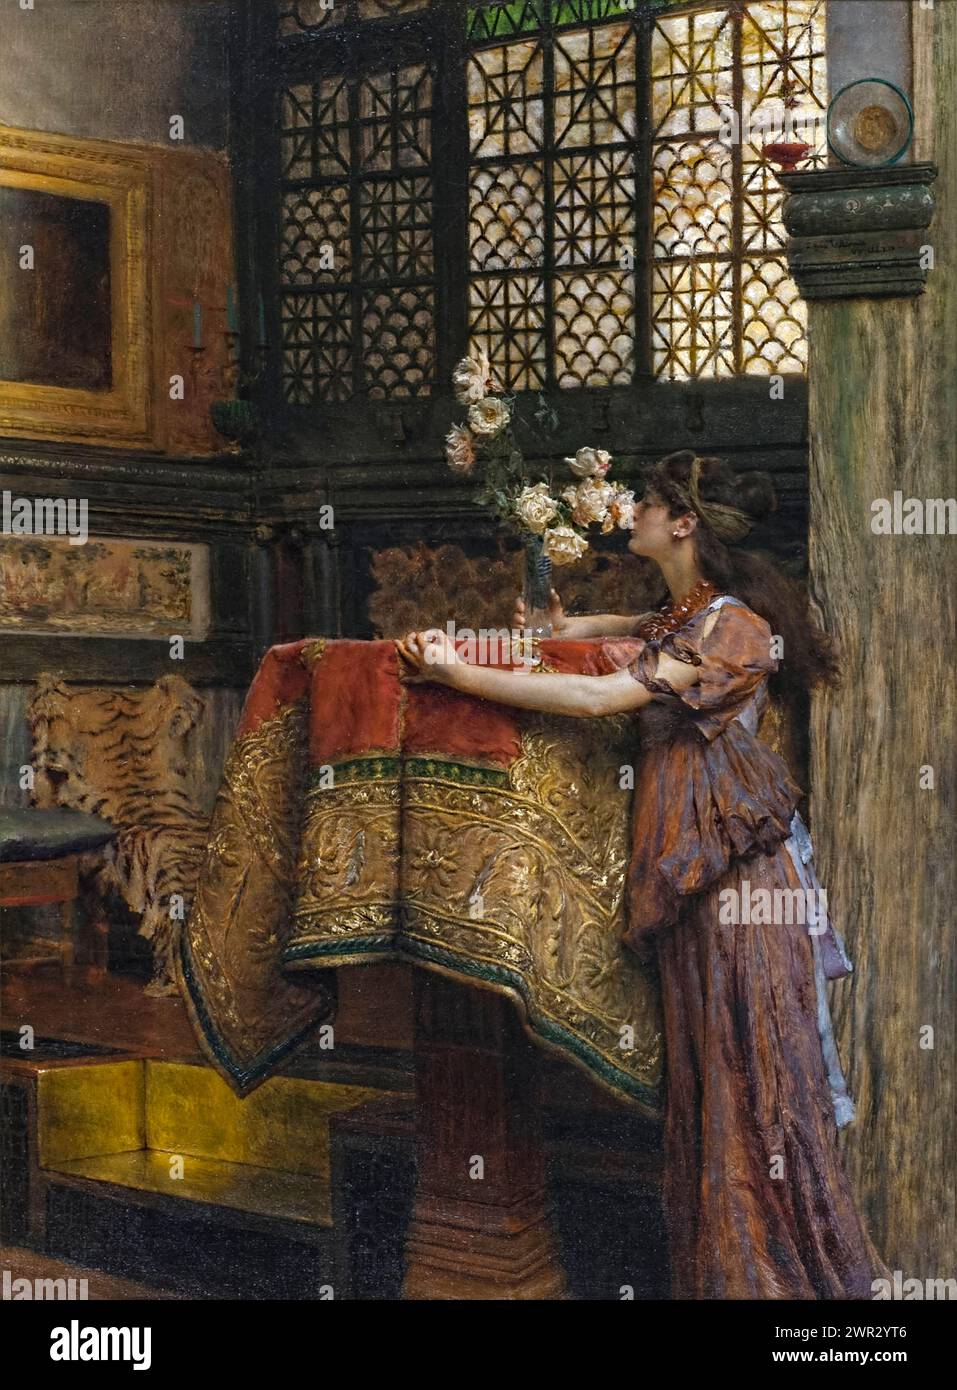 In My Studio by Sir Lawrence Alma-Tadema (1836-1912) painted in 1893 in the Romantic style. Credit: Private Collection / Universal Art Archive Stock Photo